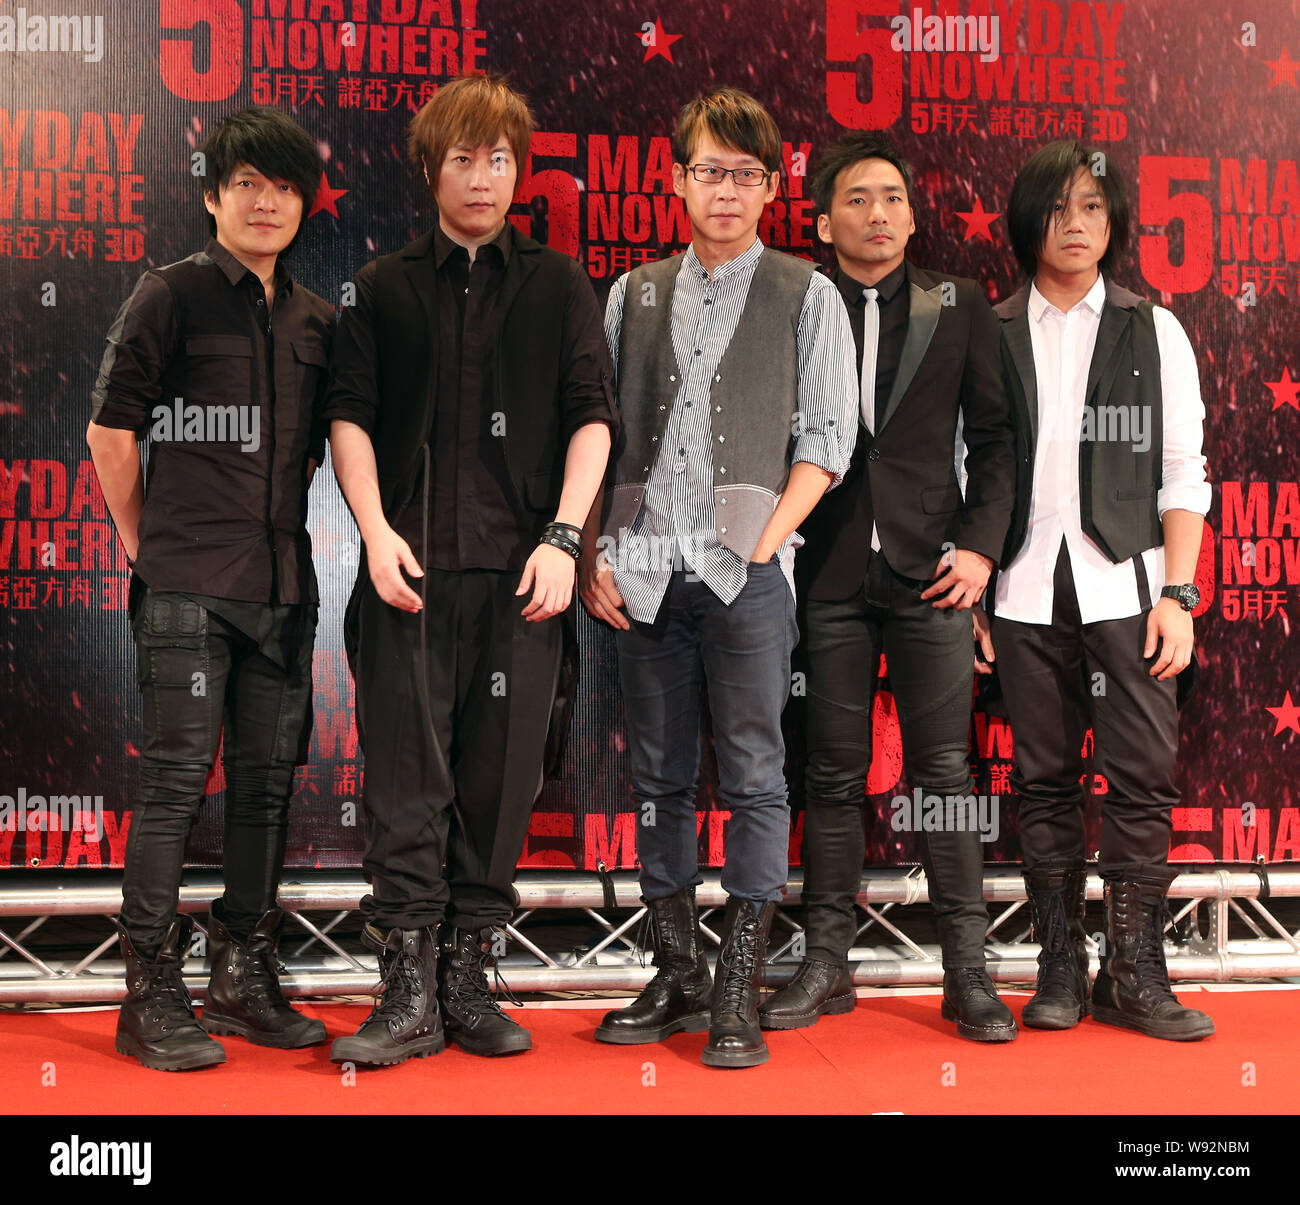 Members of Taiwanese pop group May Day pose on the red carpet as they  arrive at the premiere of their new film, Nowhere, in Taipei, Taiwan, 8  Septembe Stock Photo - Alamy